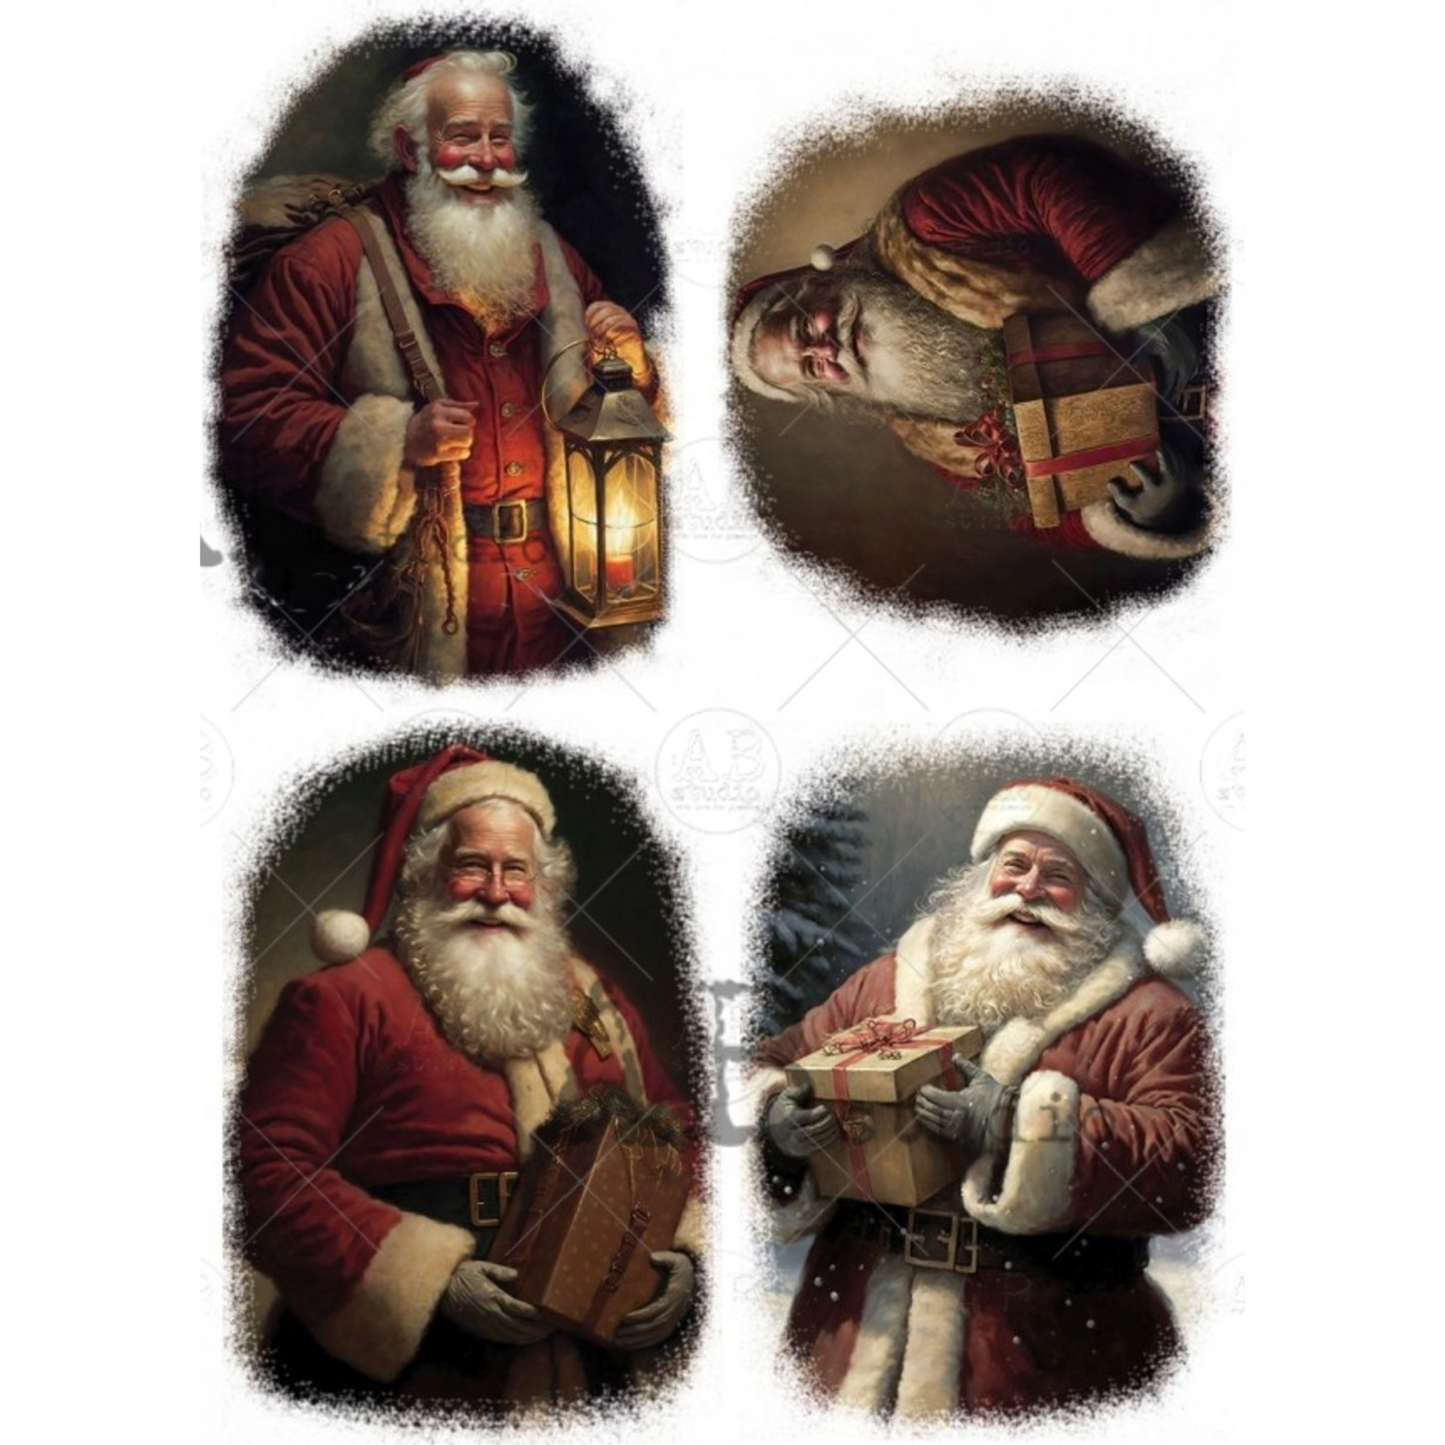 "4 Santas" decoupage rice paper by AB Studio. Available at Milton's Daughter.